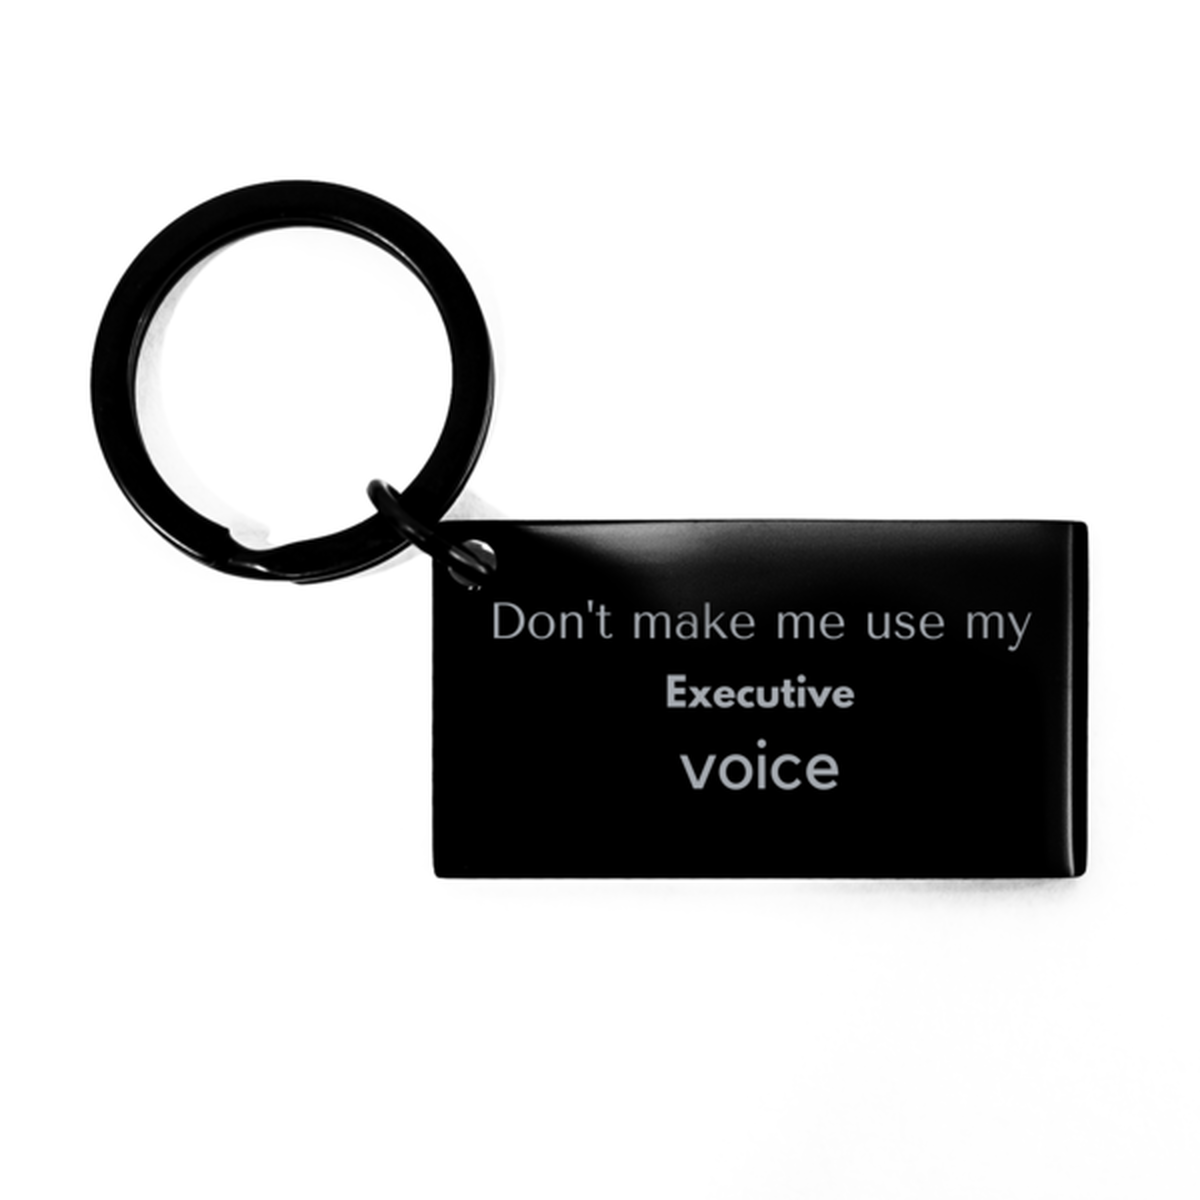 Don't make me use my Executive voice, Sarcasm Executive Gifts, Christmas Executive Keychain Birthday Unique Gifts For Executive Coworkers, Men, Women, Colleague, Friends